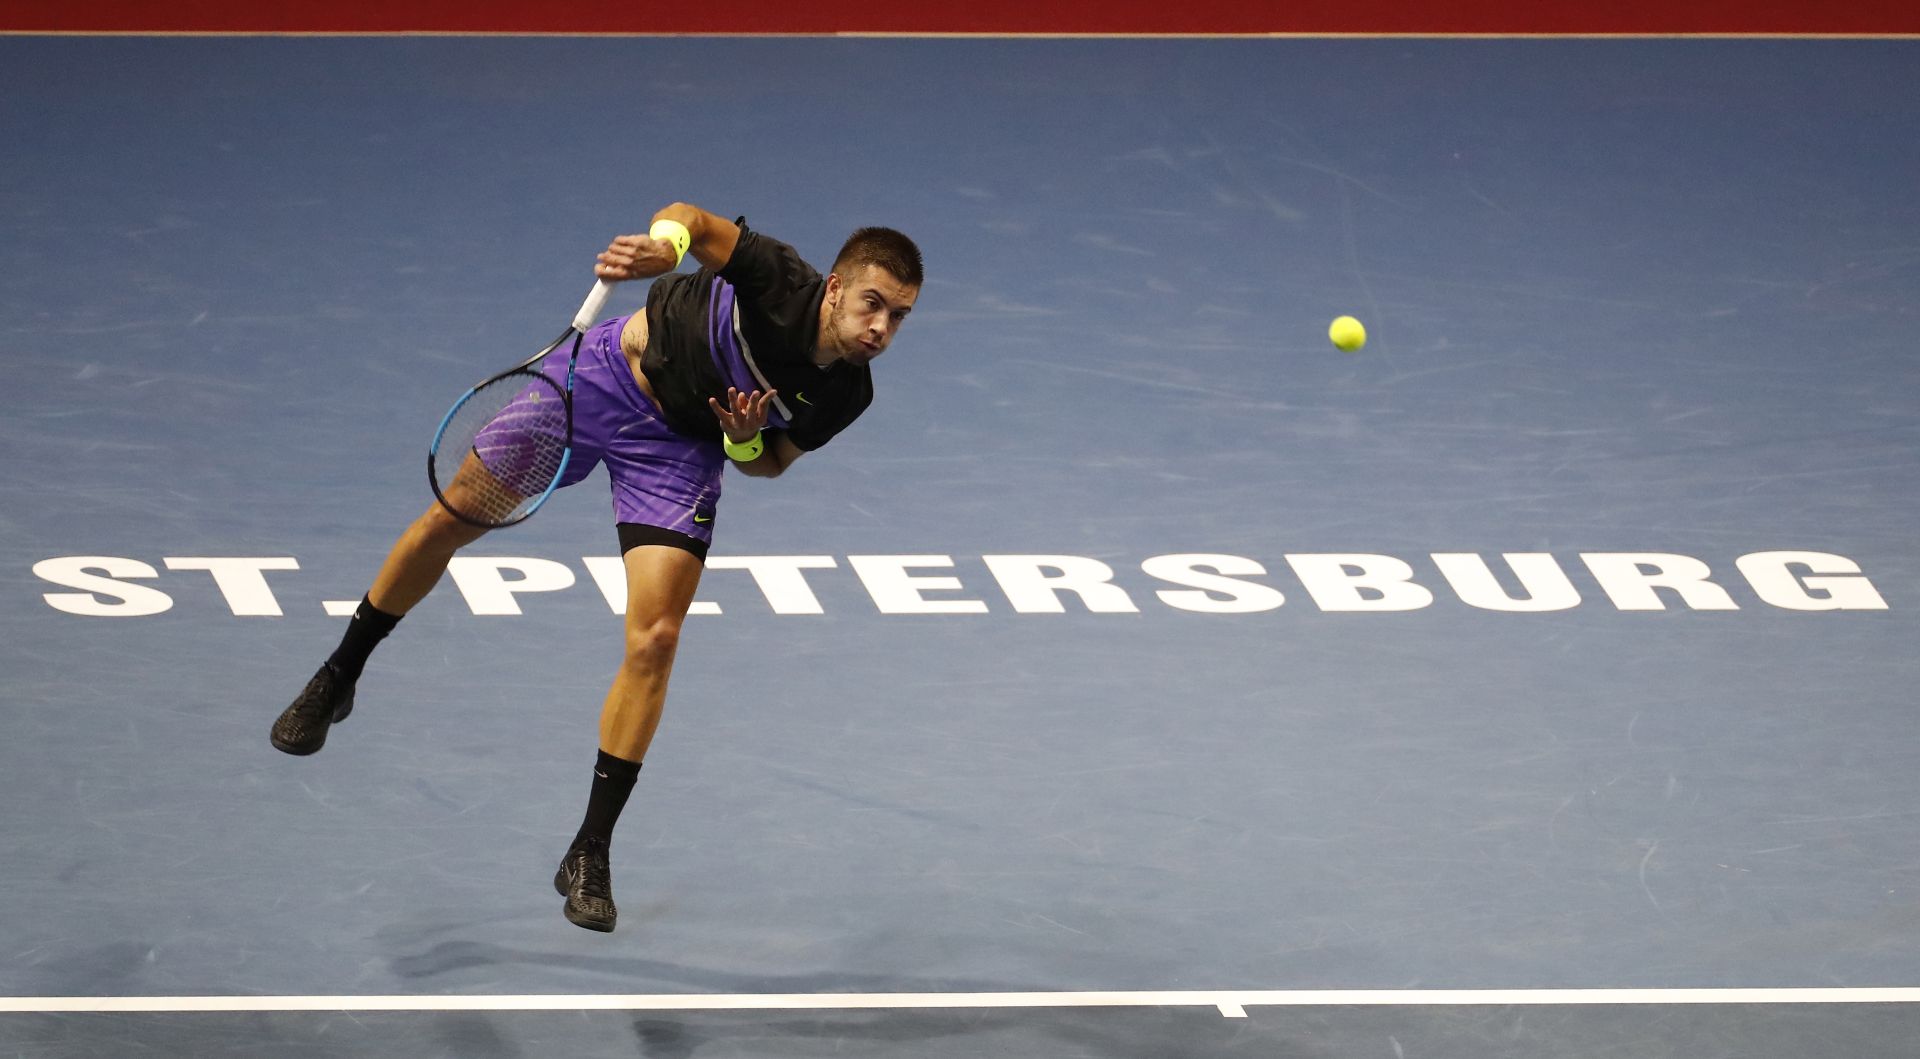 epa07861324 Borna Coric of Croatia in action against Russia’s Daniil Medvedev during their final match of the St.Petersburg Open ATP tennis tournament in St.Petersburg, Russia, 22 September 2019.  EPA/ANATOLY MALTSEV